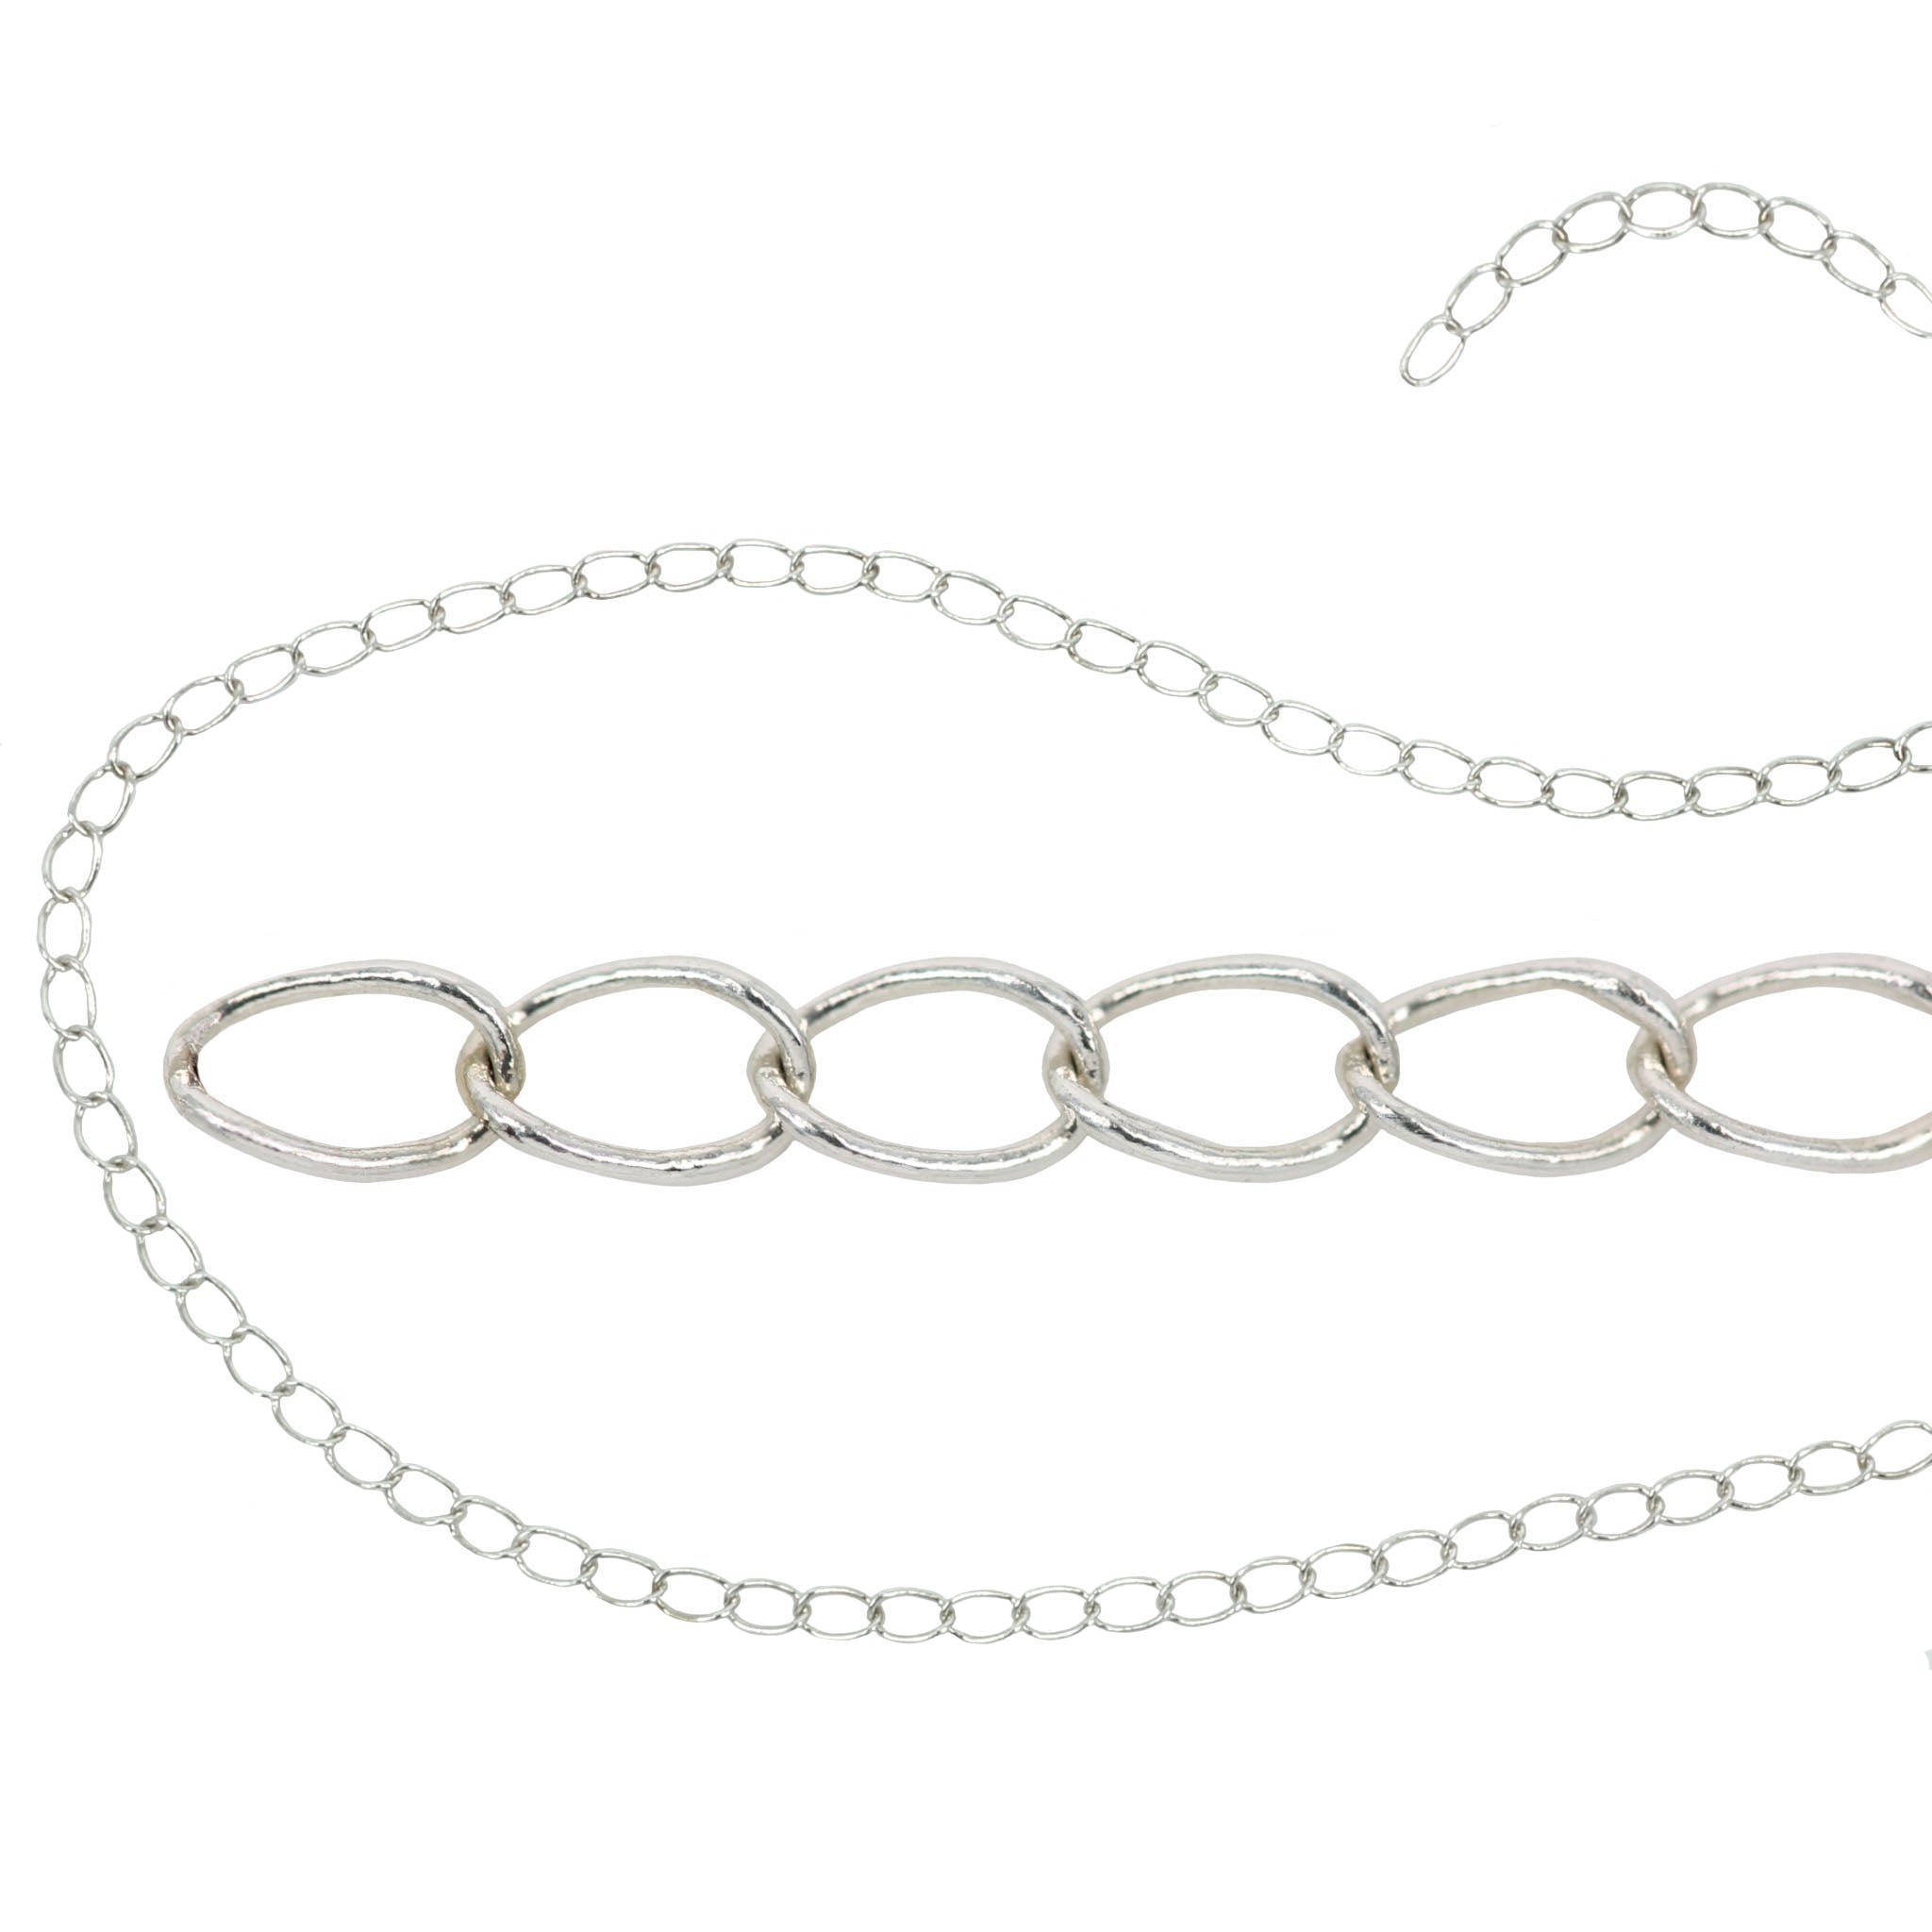 Curb Chain in Sterling Silver 2.5mm x 3.7mm links